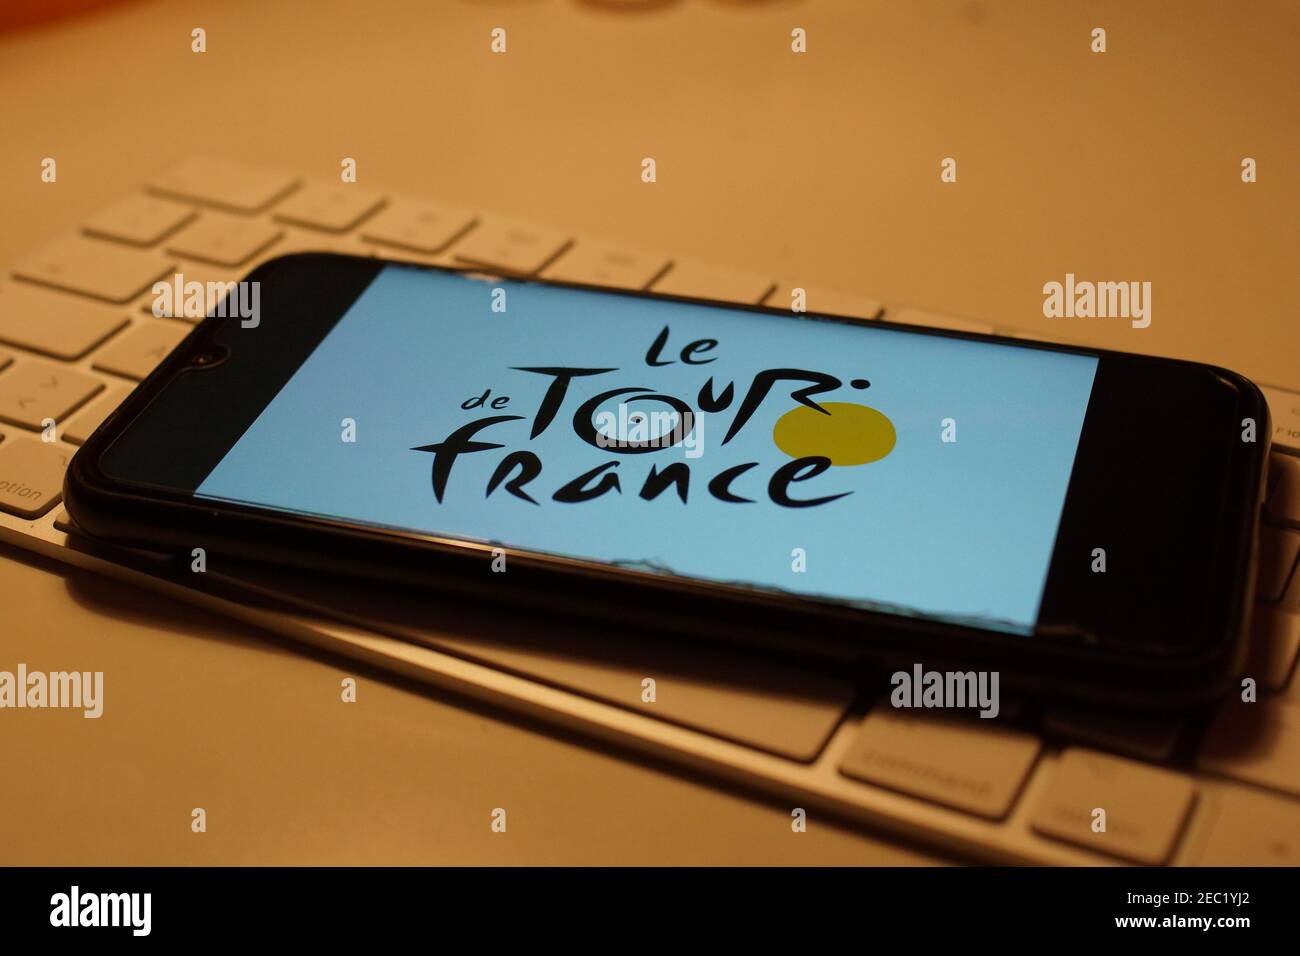 Smartphone with Tour de france logo on computer keyboard Stock Photo